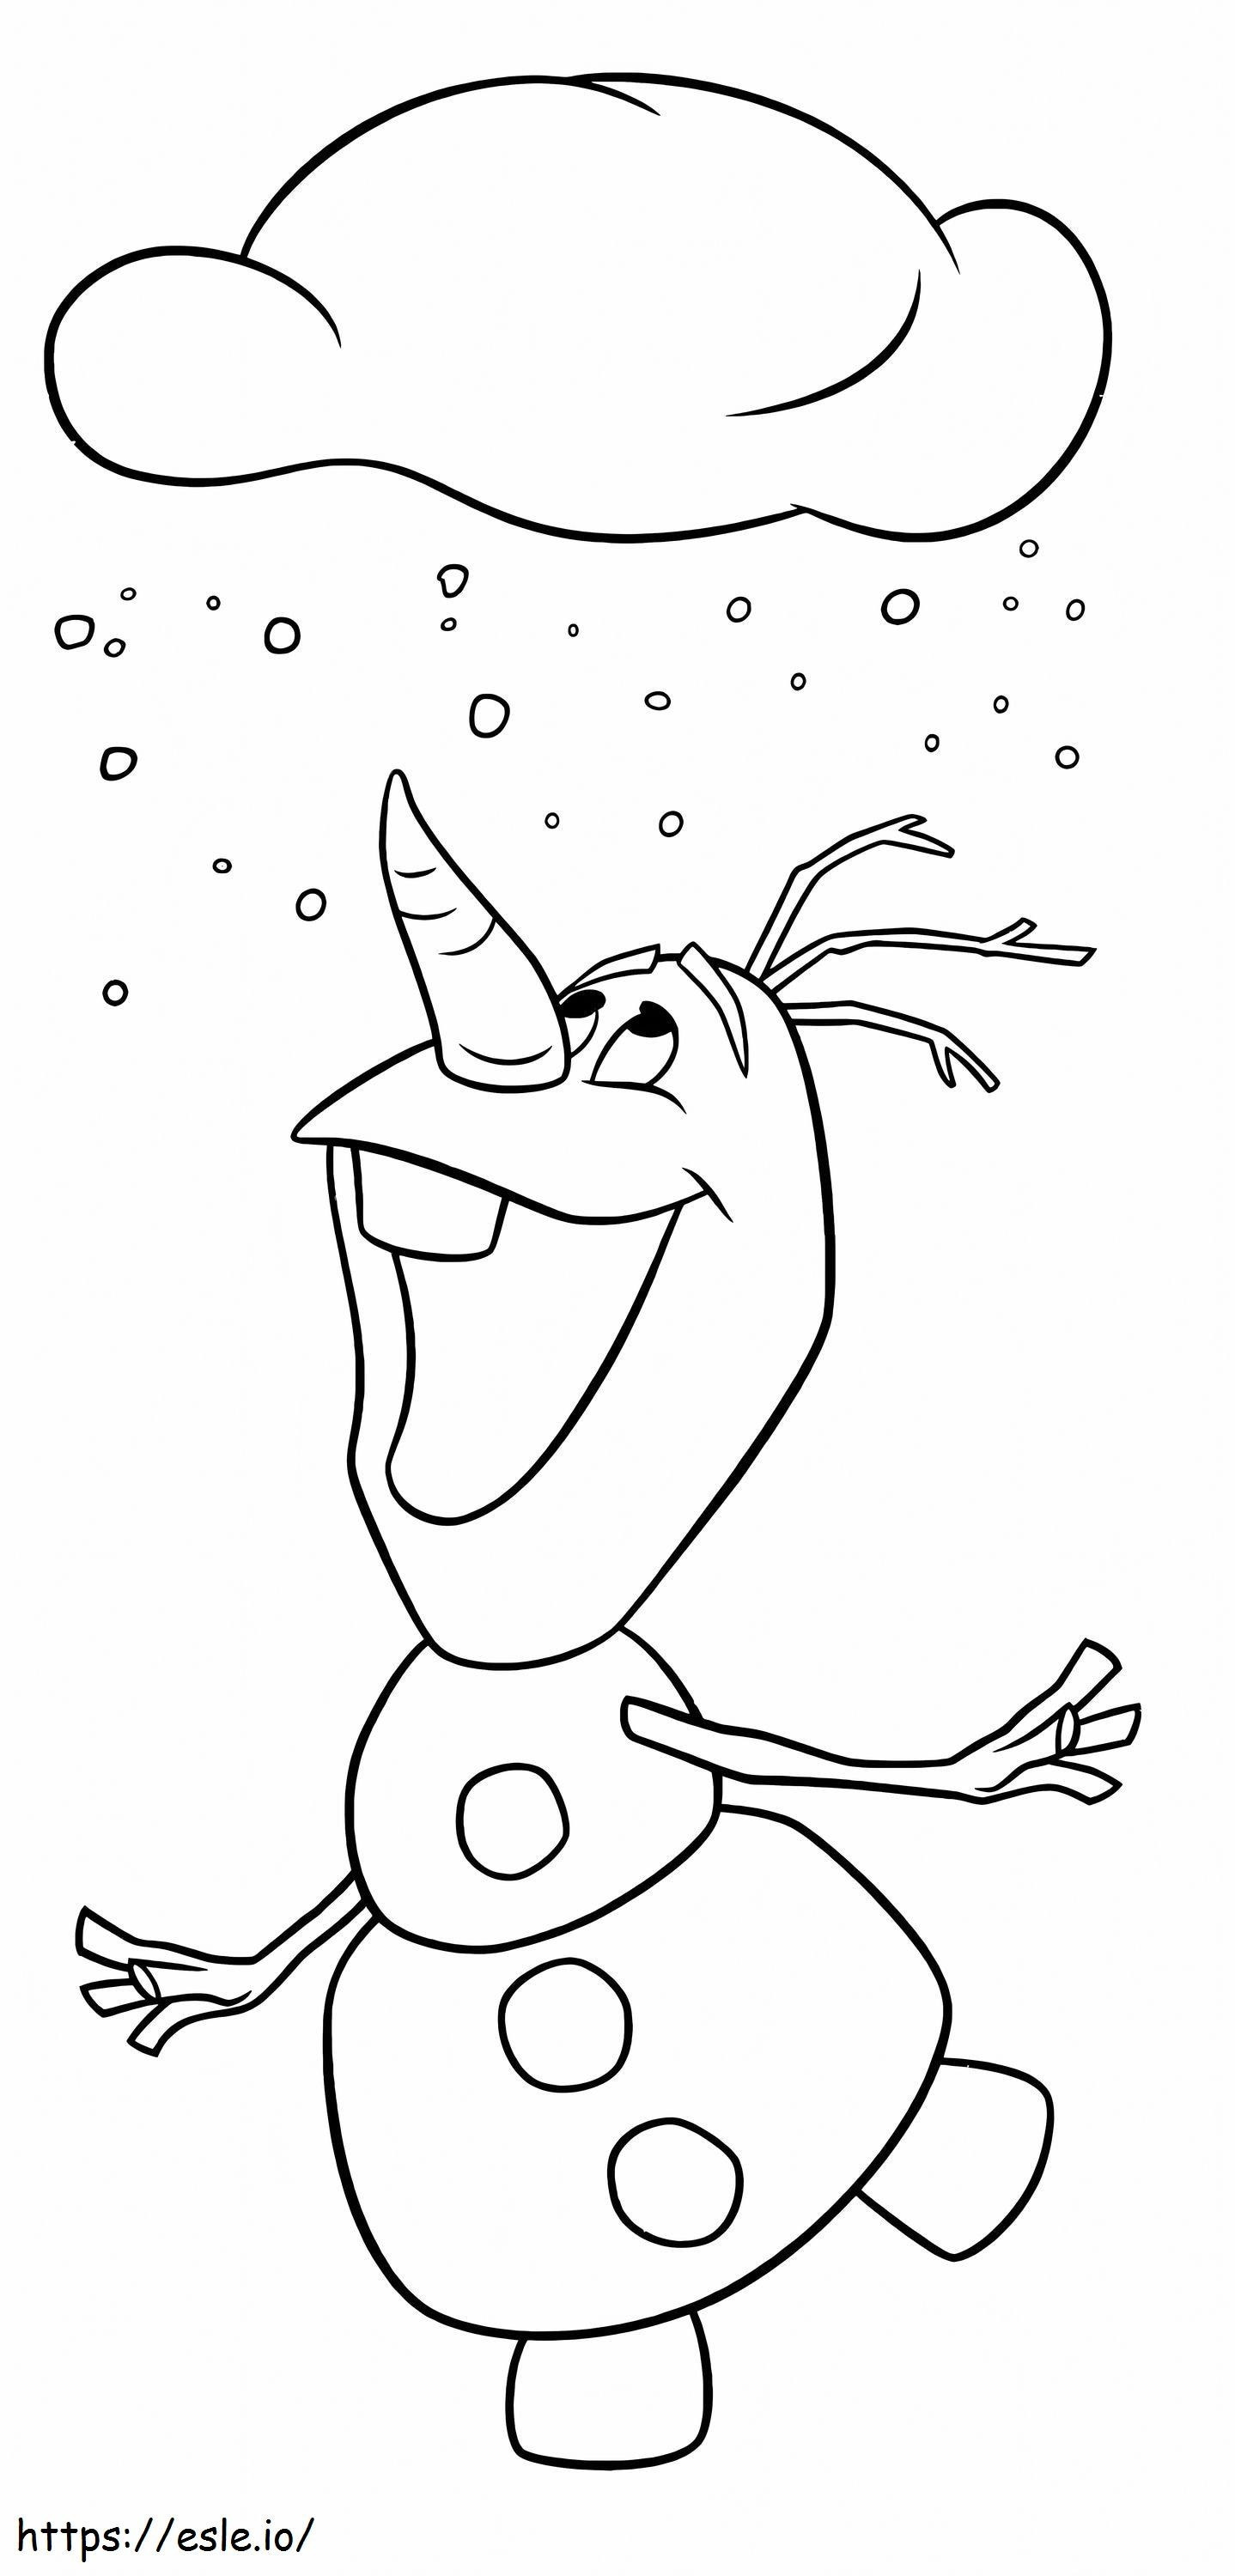 Olaf With The Cloud coloring page